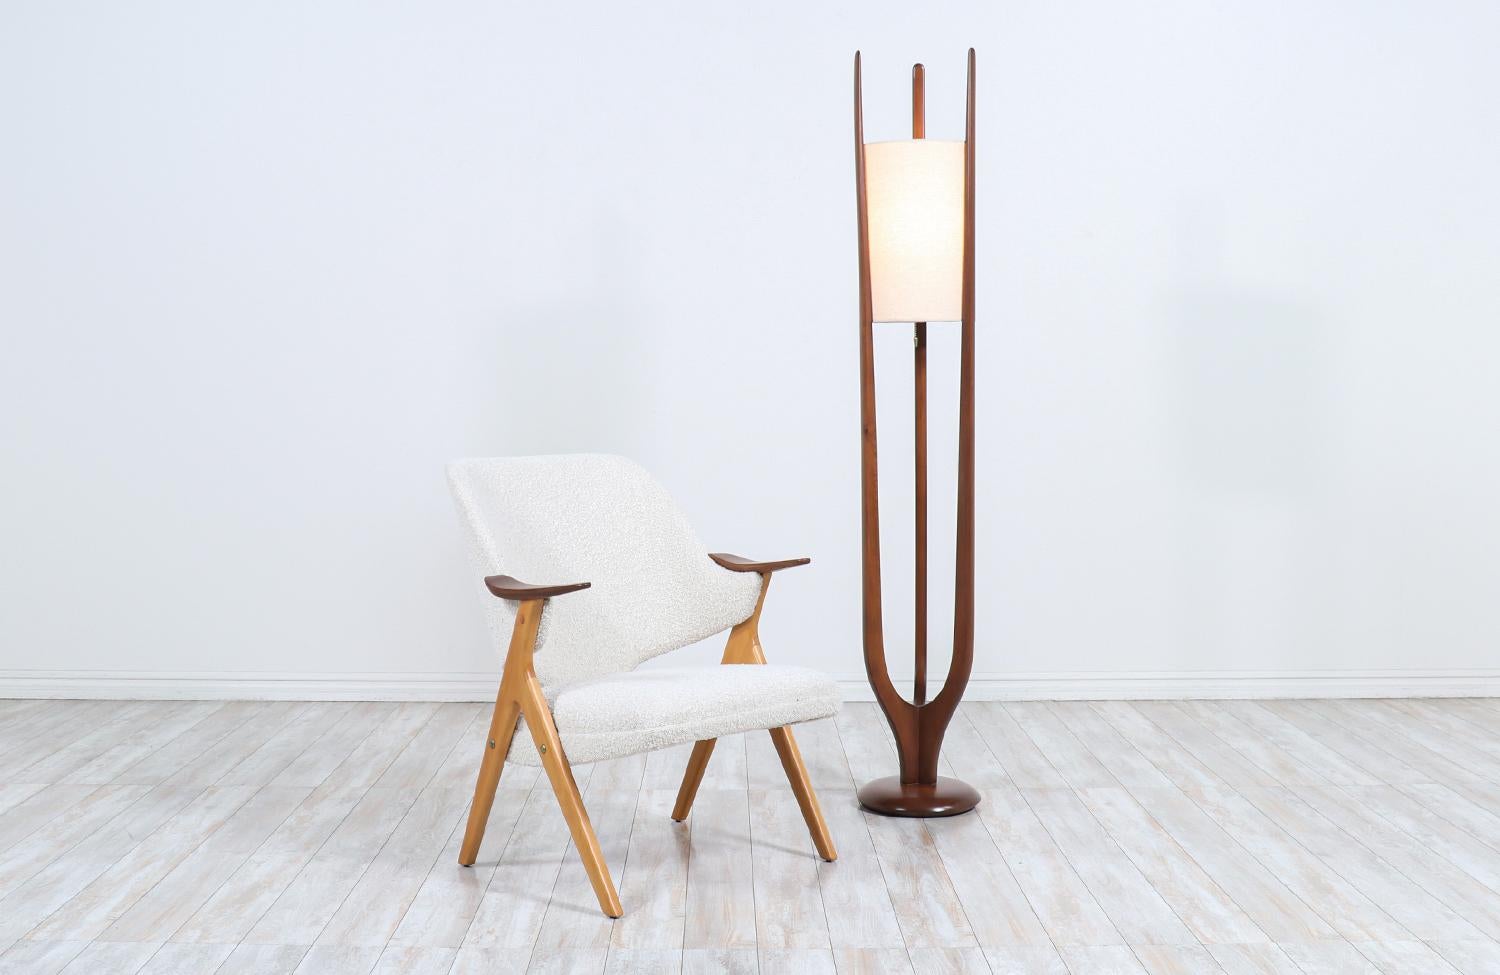 California Modern sculpted trident-style floor lamp by Modeline.